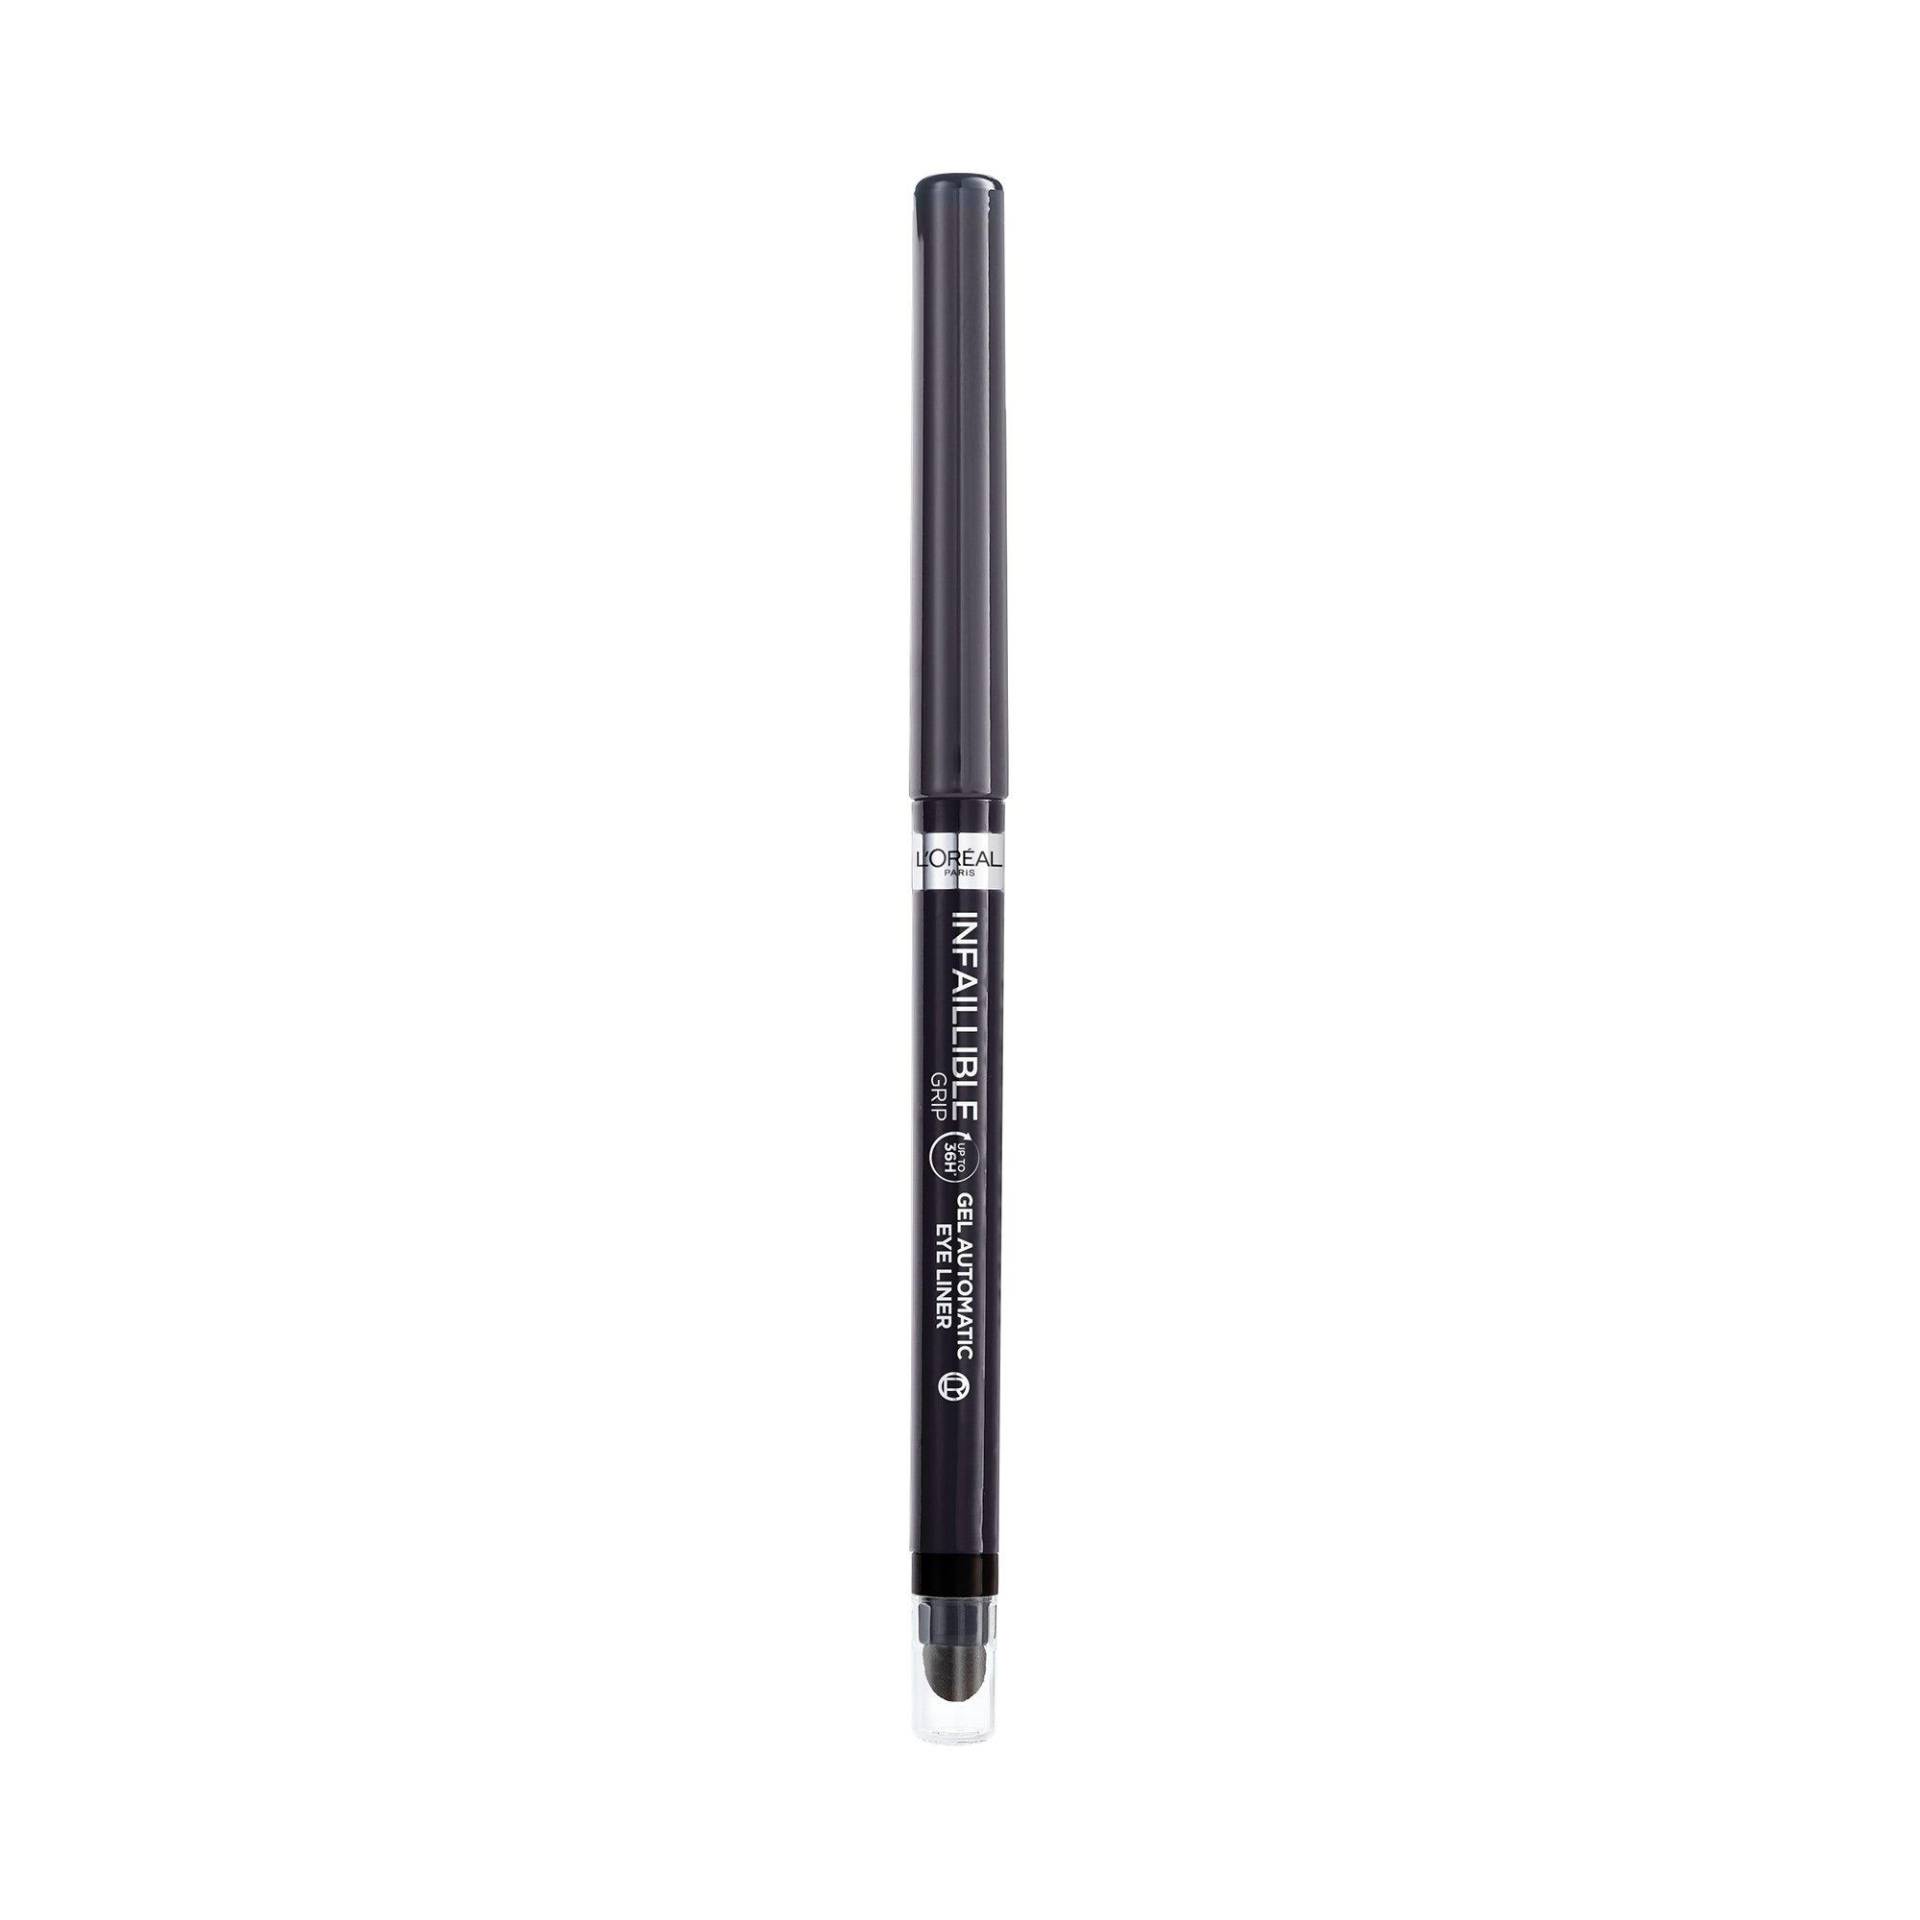 Infallible Automatic Grip Eyeliner Damen Taupe Grey von L'OREAL